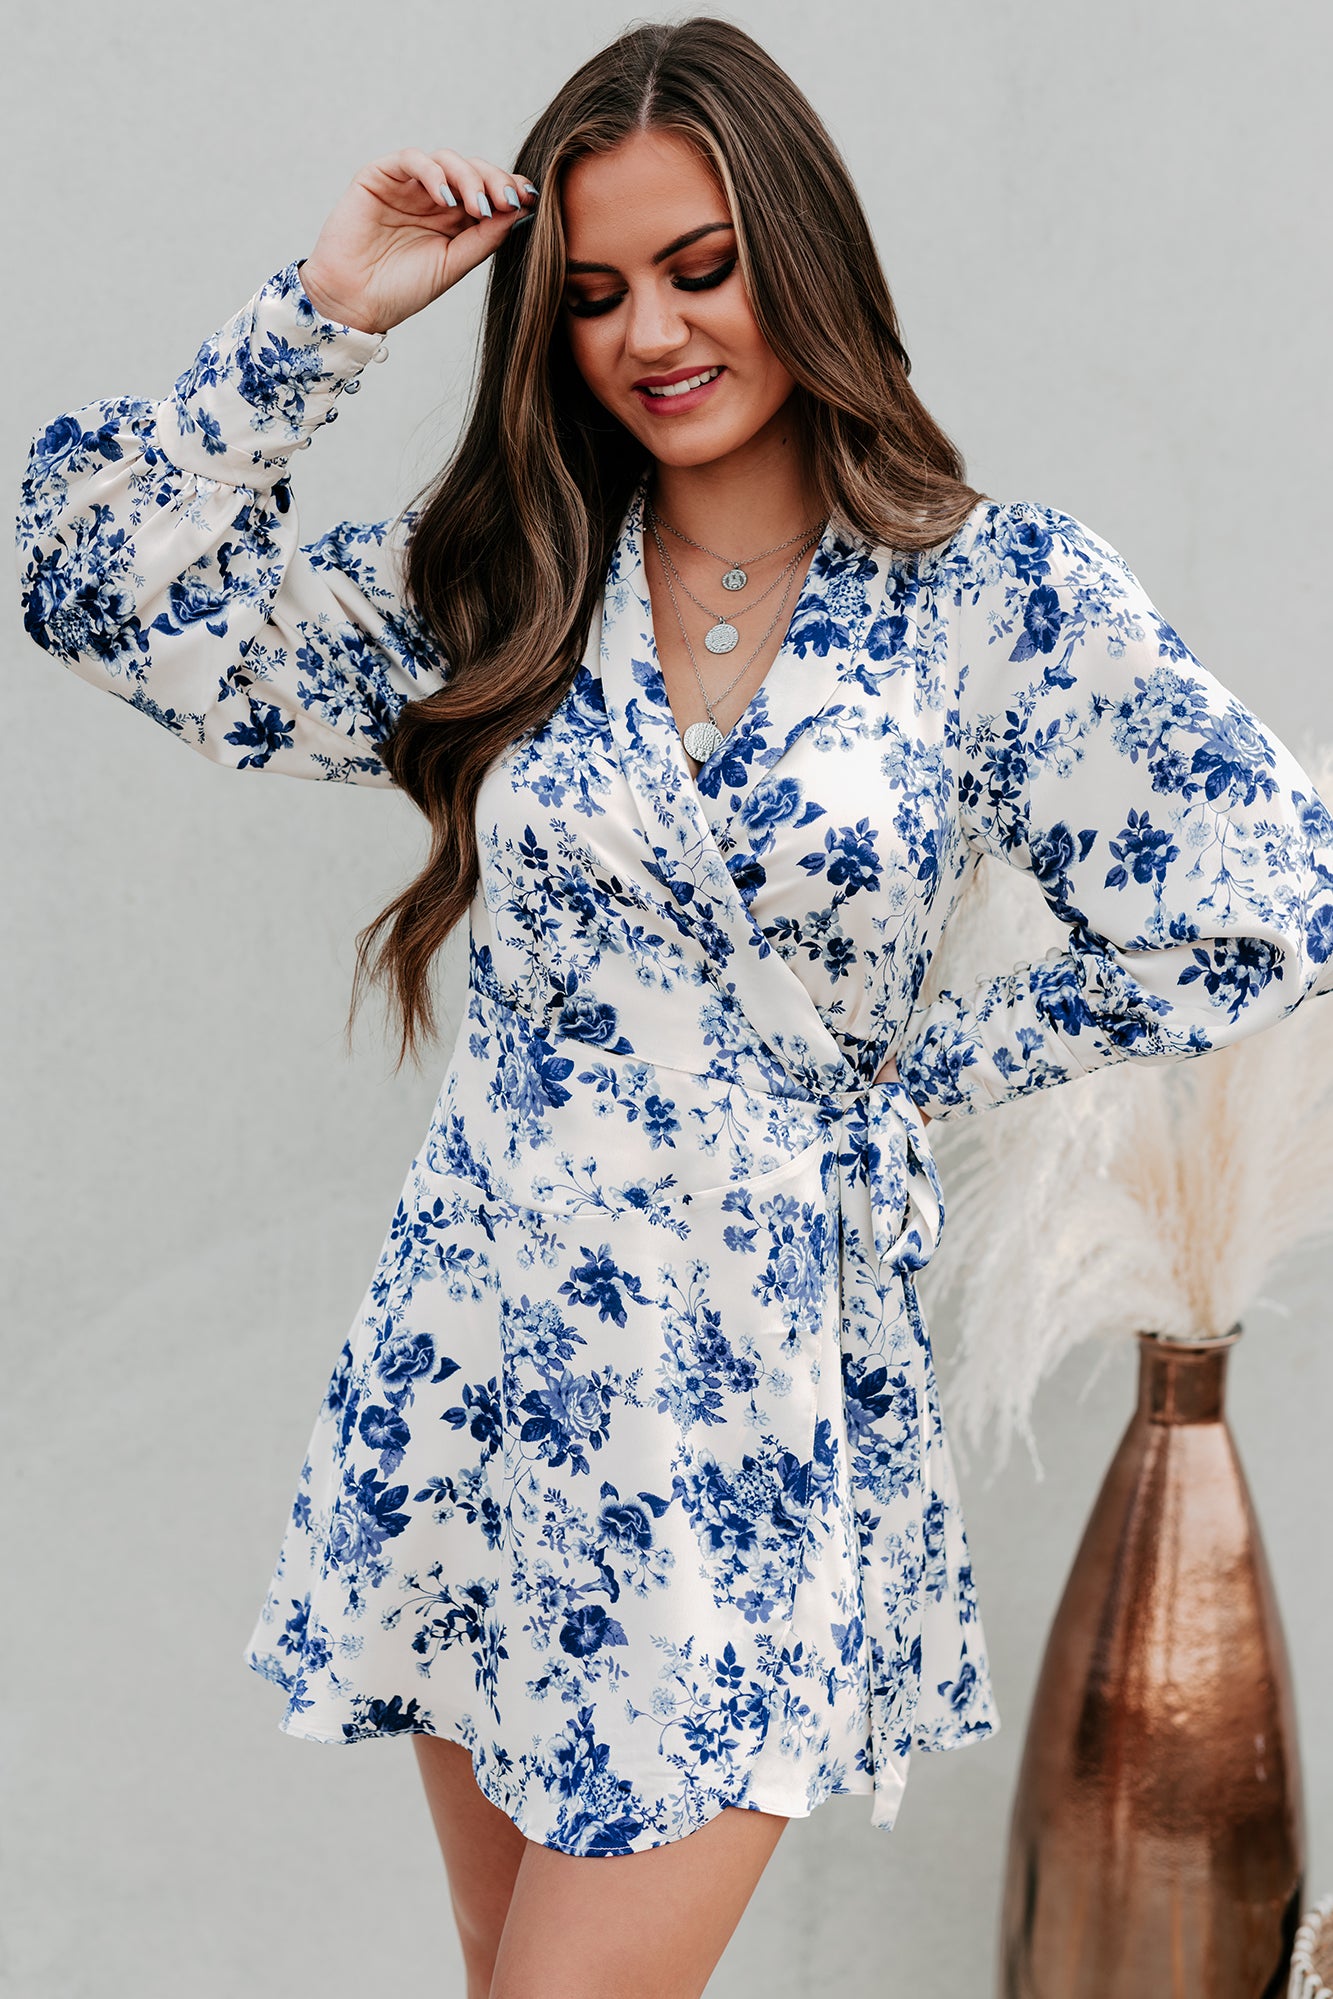 There's Only You Satin Floral Wrap Dress (Cream/Navy) - NanaMacs